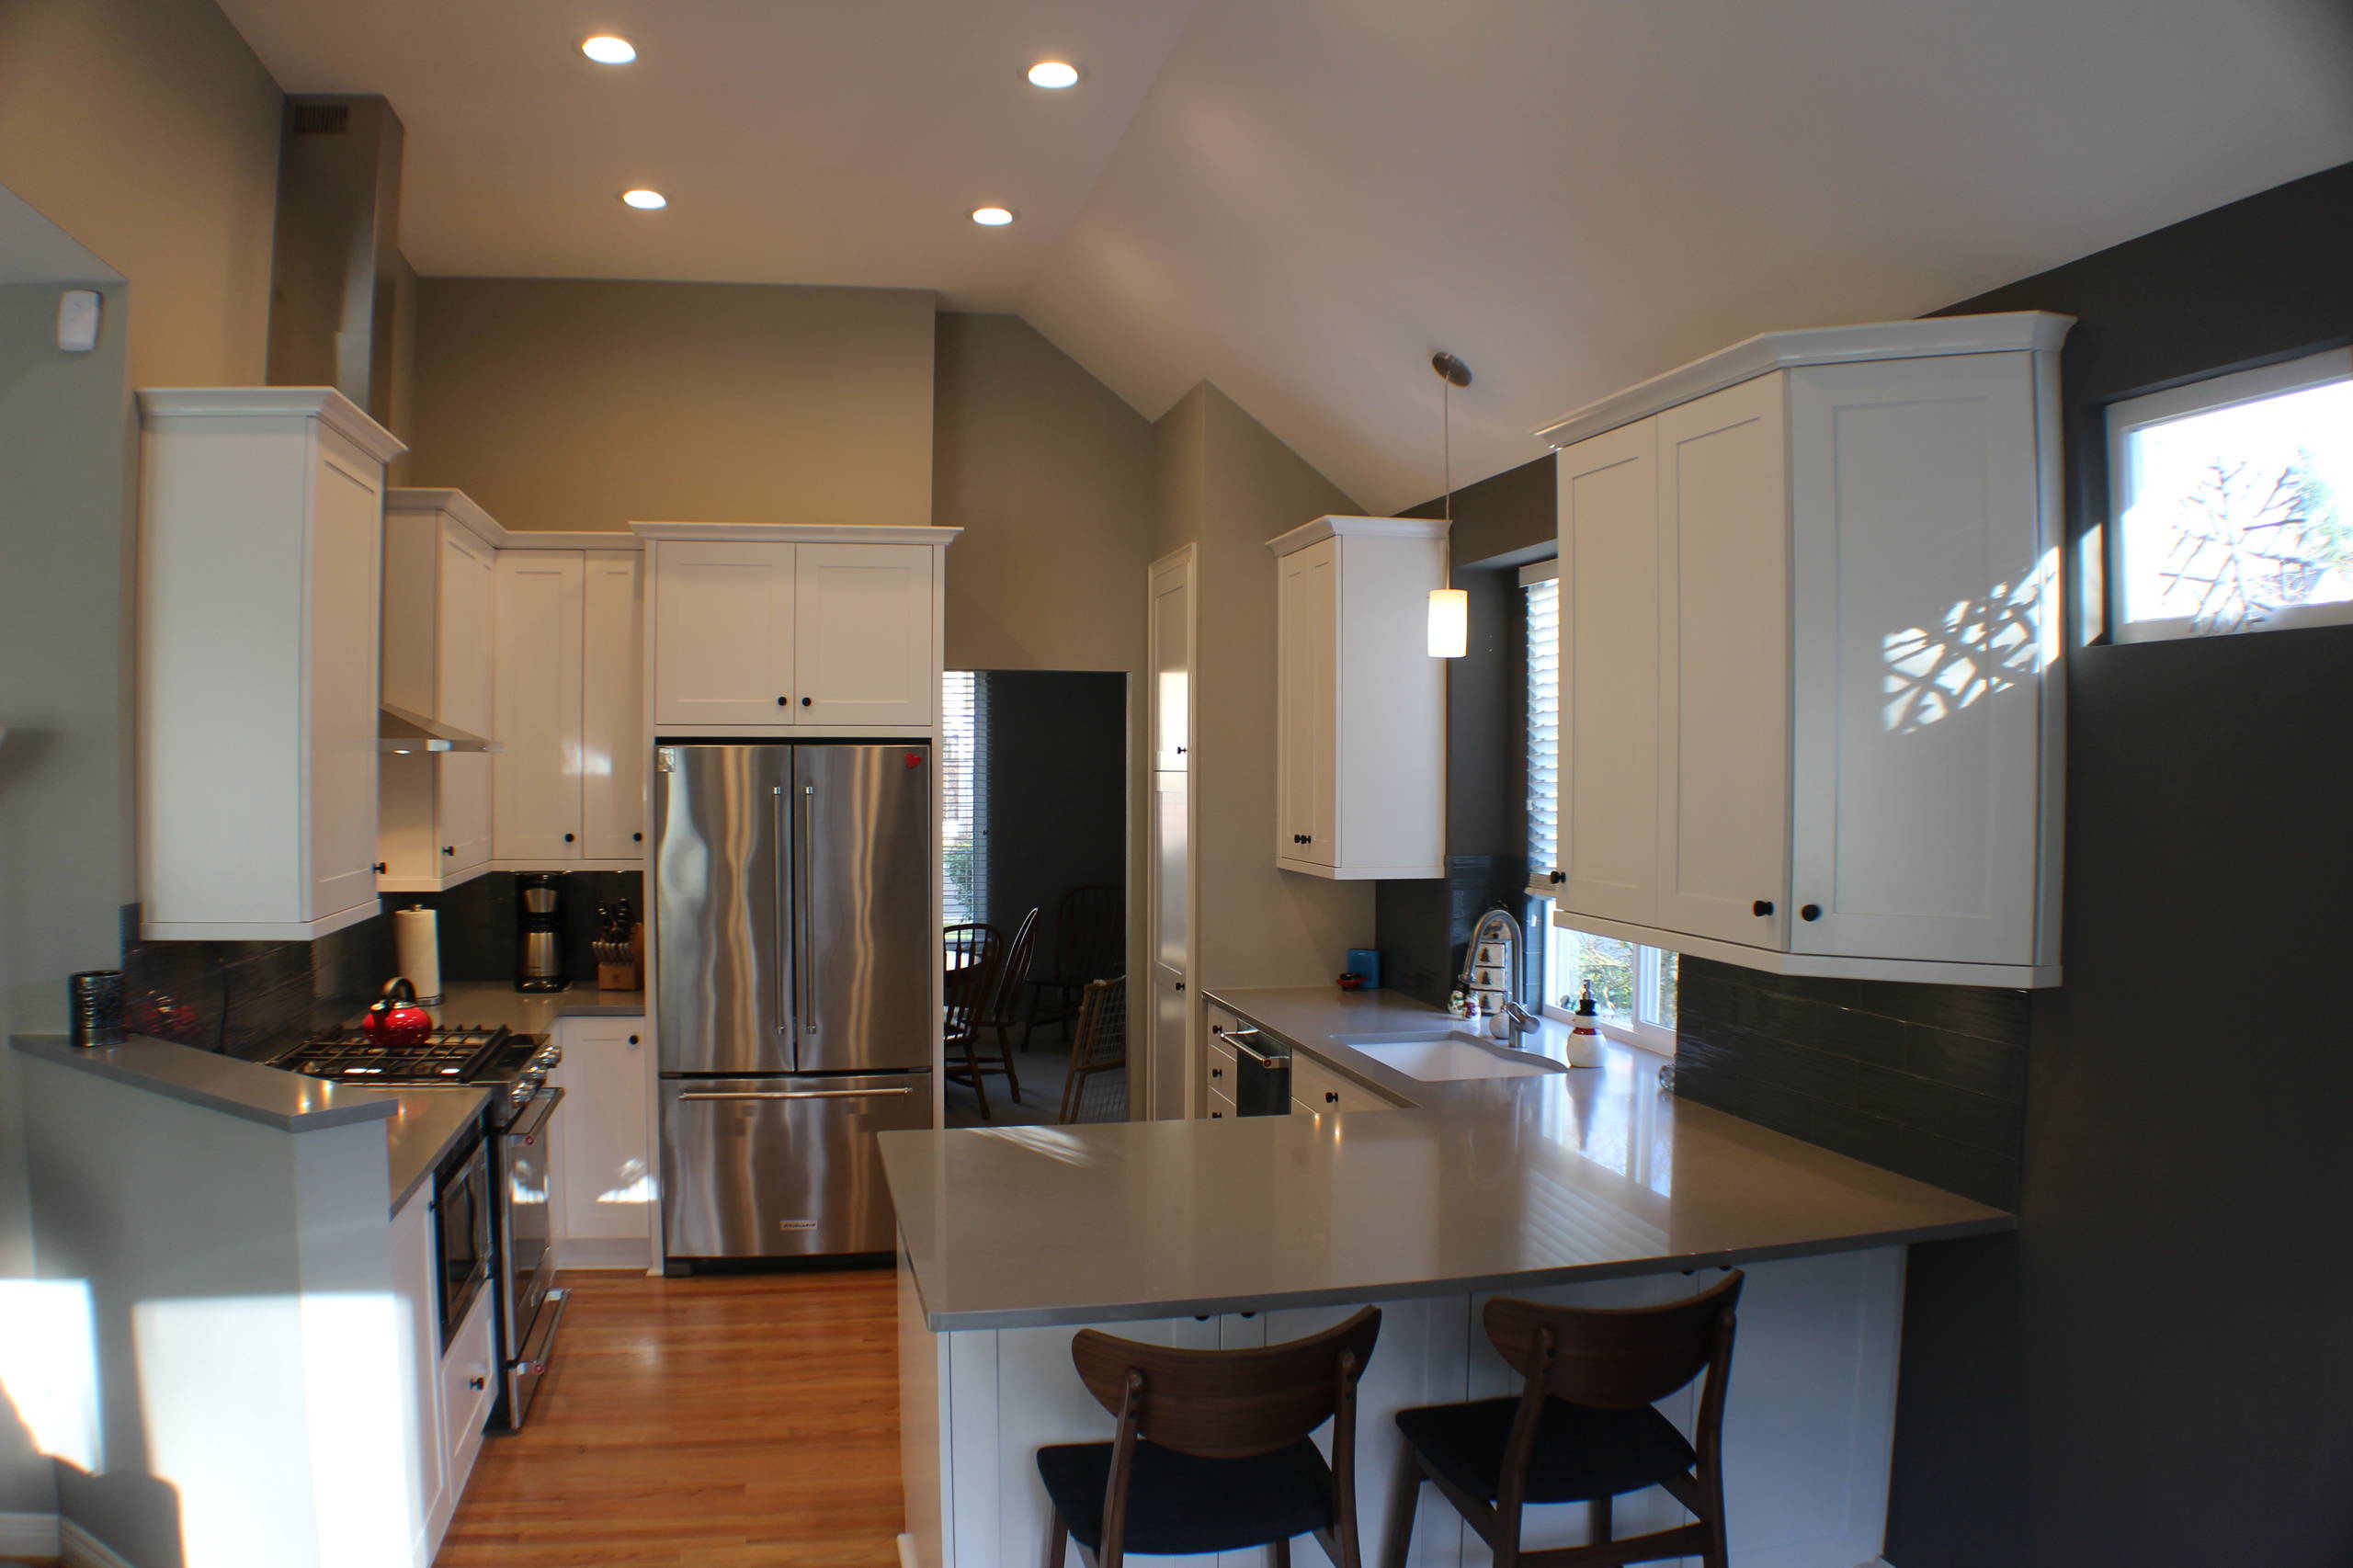 White Painted Kitchens